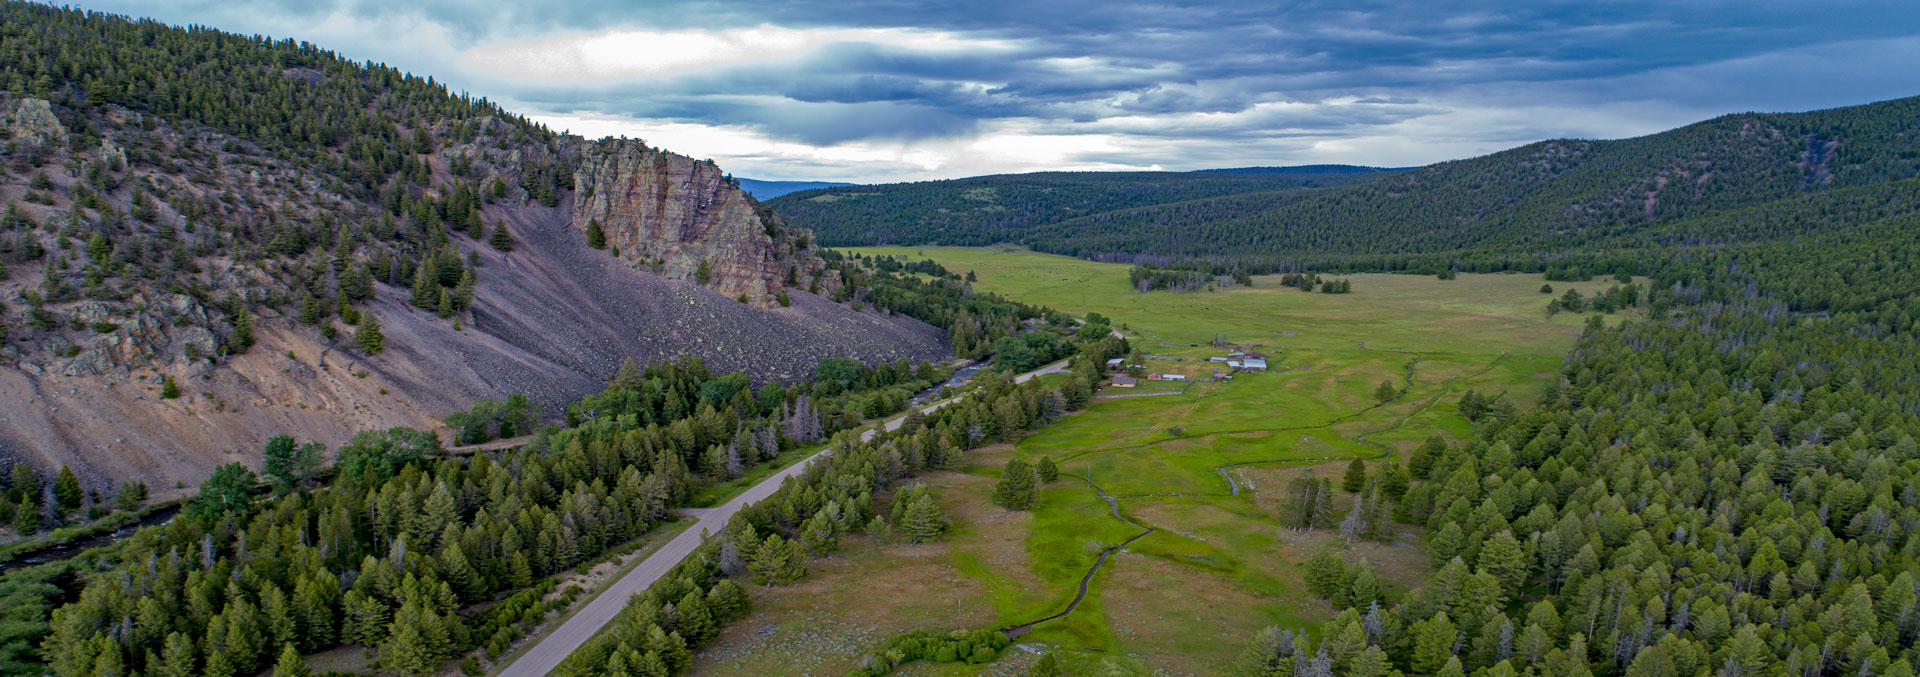 montana ranch land for sale eagle rock ranch on the wise river